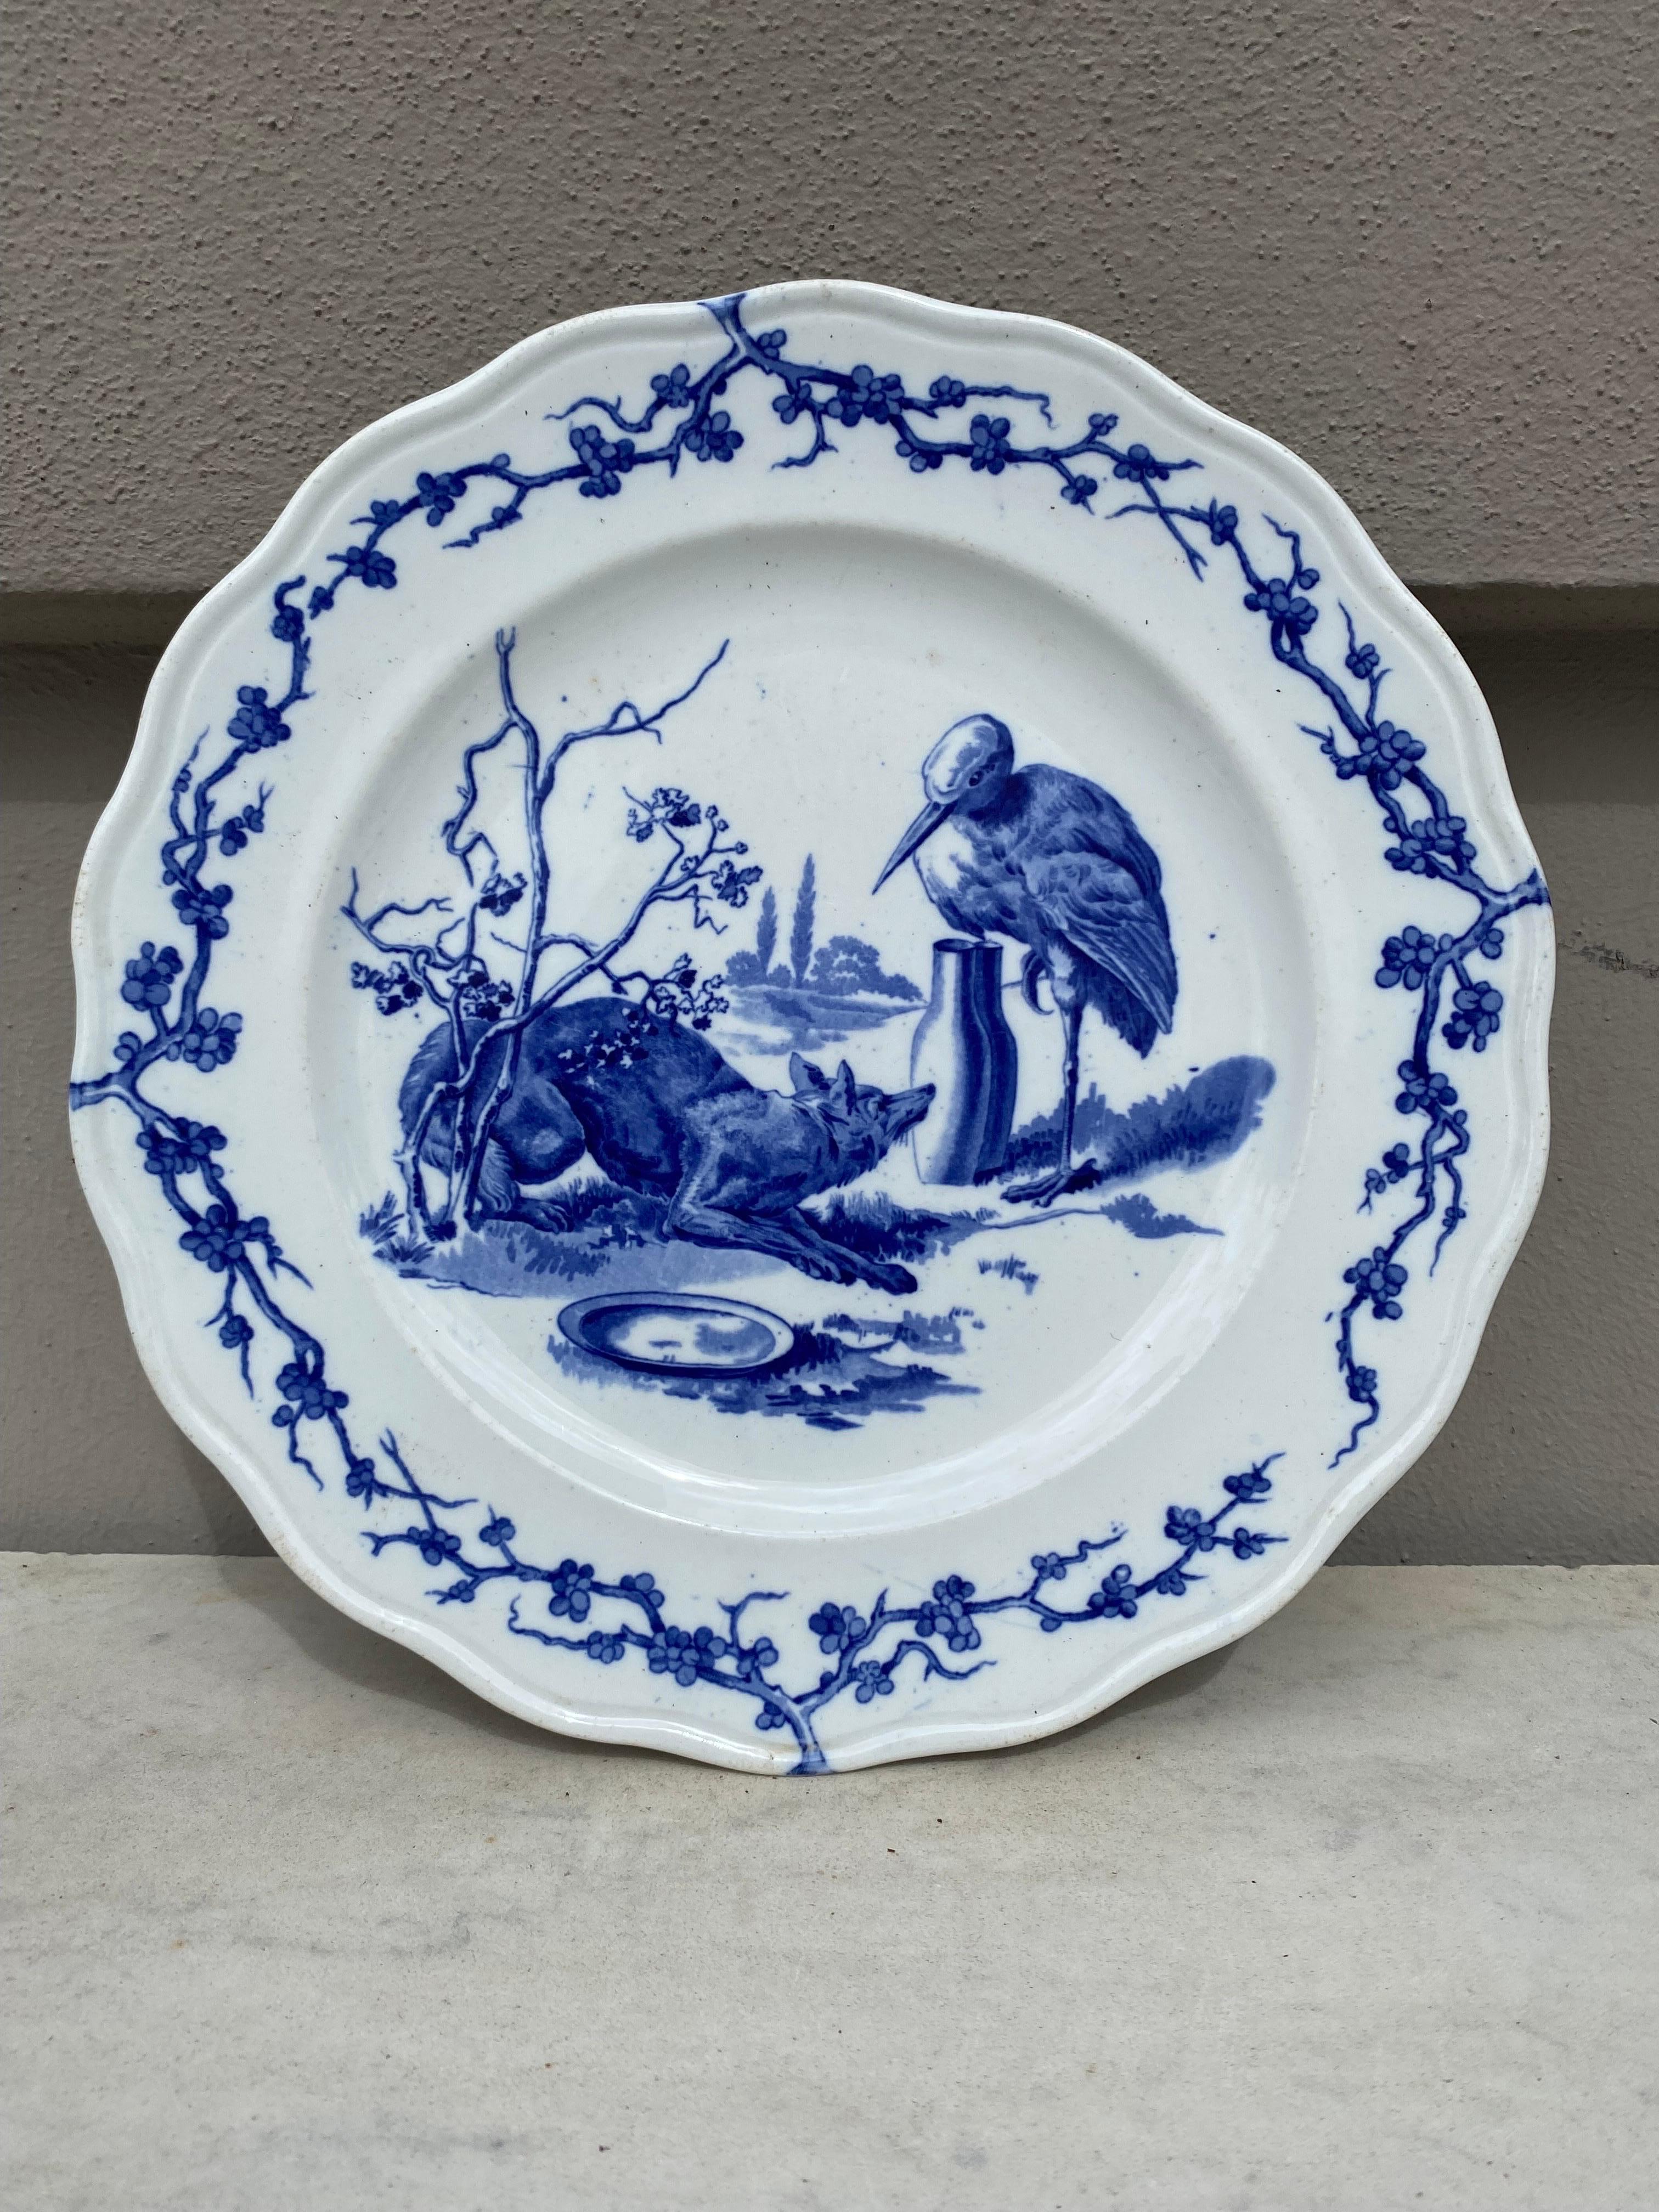 English blue & white plate fox and stork brown Westhead and Moore, circa 1890.
Was sold in the Grand Depot 21 rue Drouot Paris.
Fontaine / Aesops Fables.
English Losange mark.